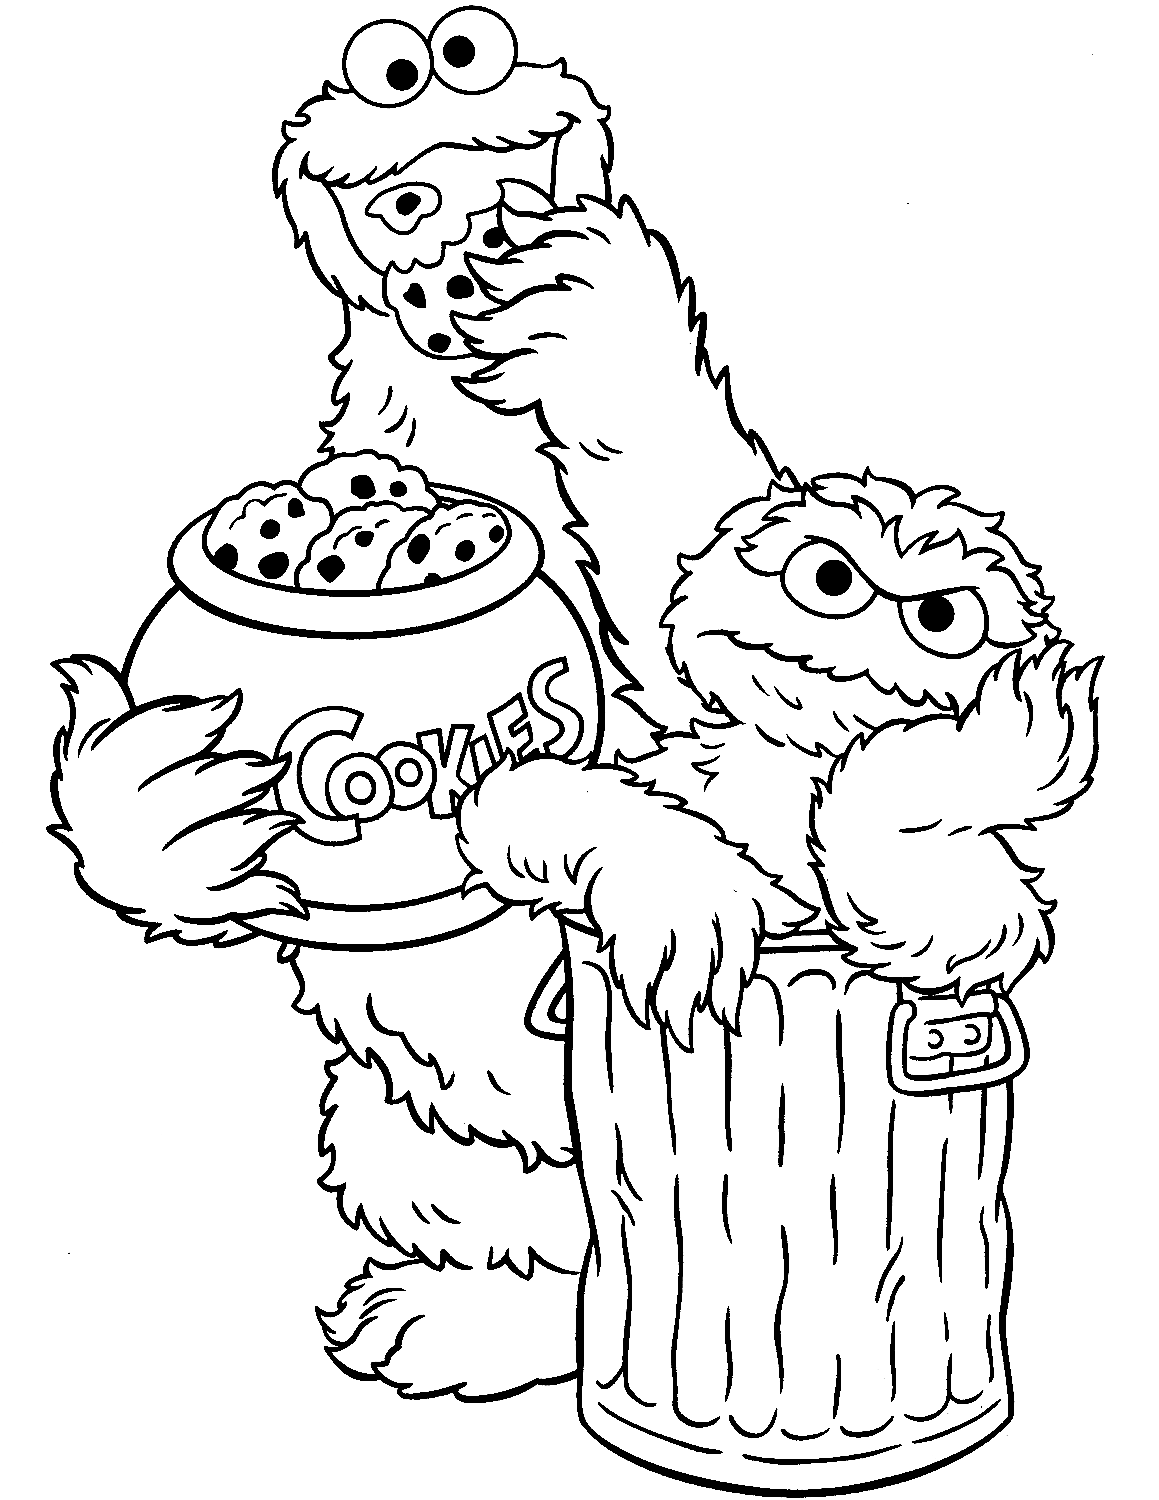 Elmo and Cookie Monster Coloring Pages